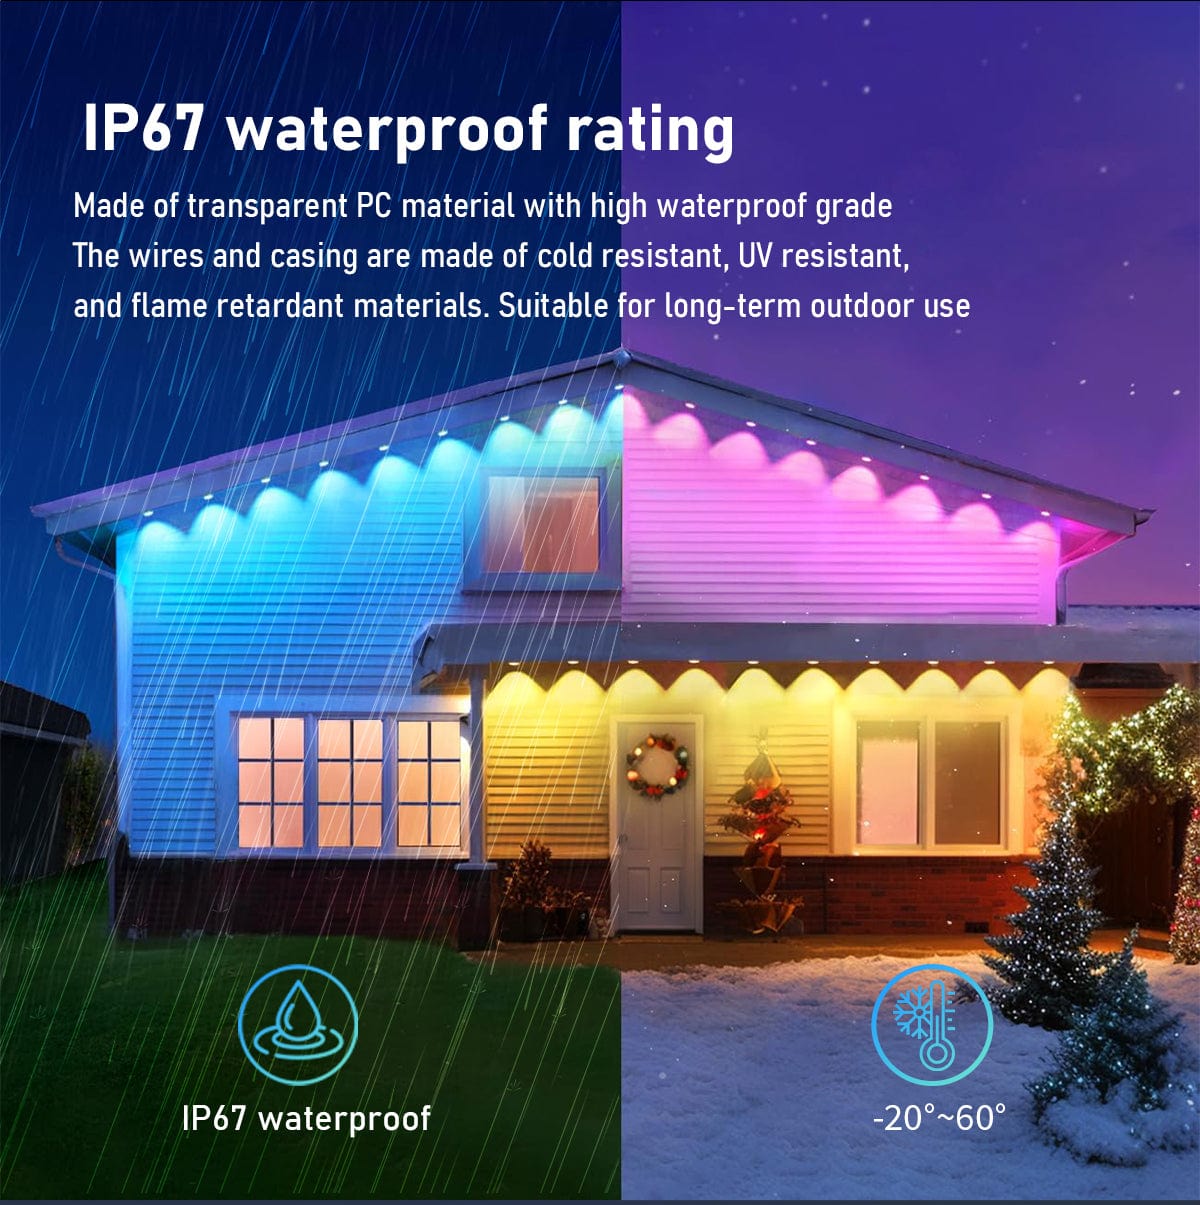 ZOOBERS Permanent Outdoor Lights - 50 ft/15 m RGBIC LED String, 30 LED Warm White Eave Lights, App & Remote Control - IP67 Waterproof with 75 Scene Modes for Outdoor Decorations ZOOBERS